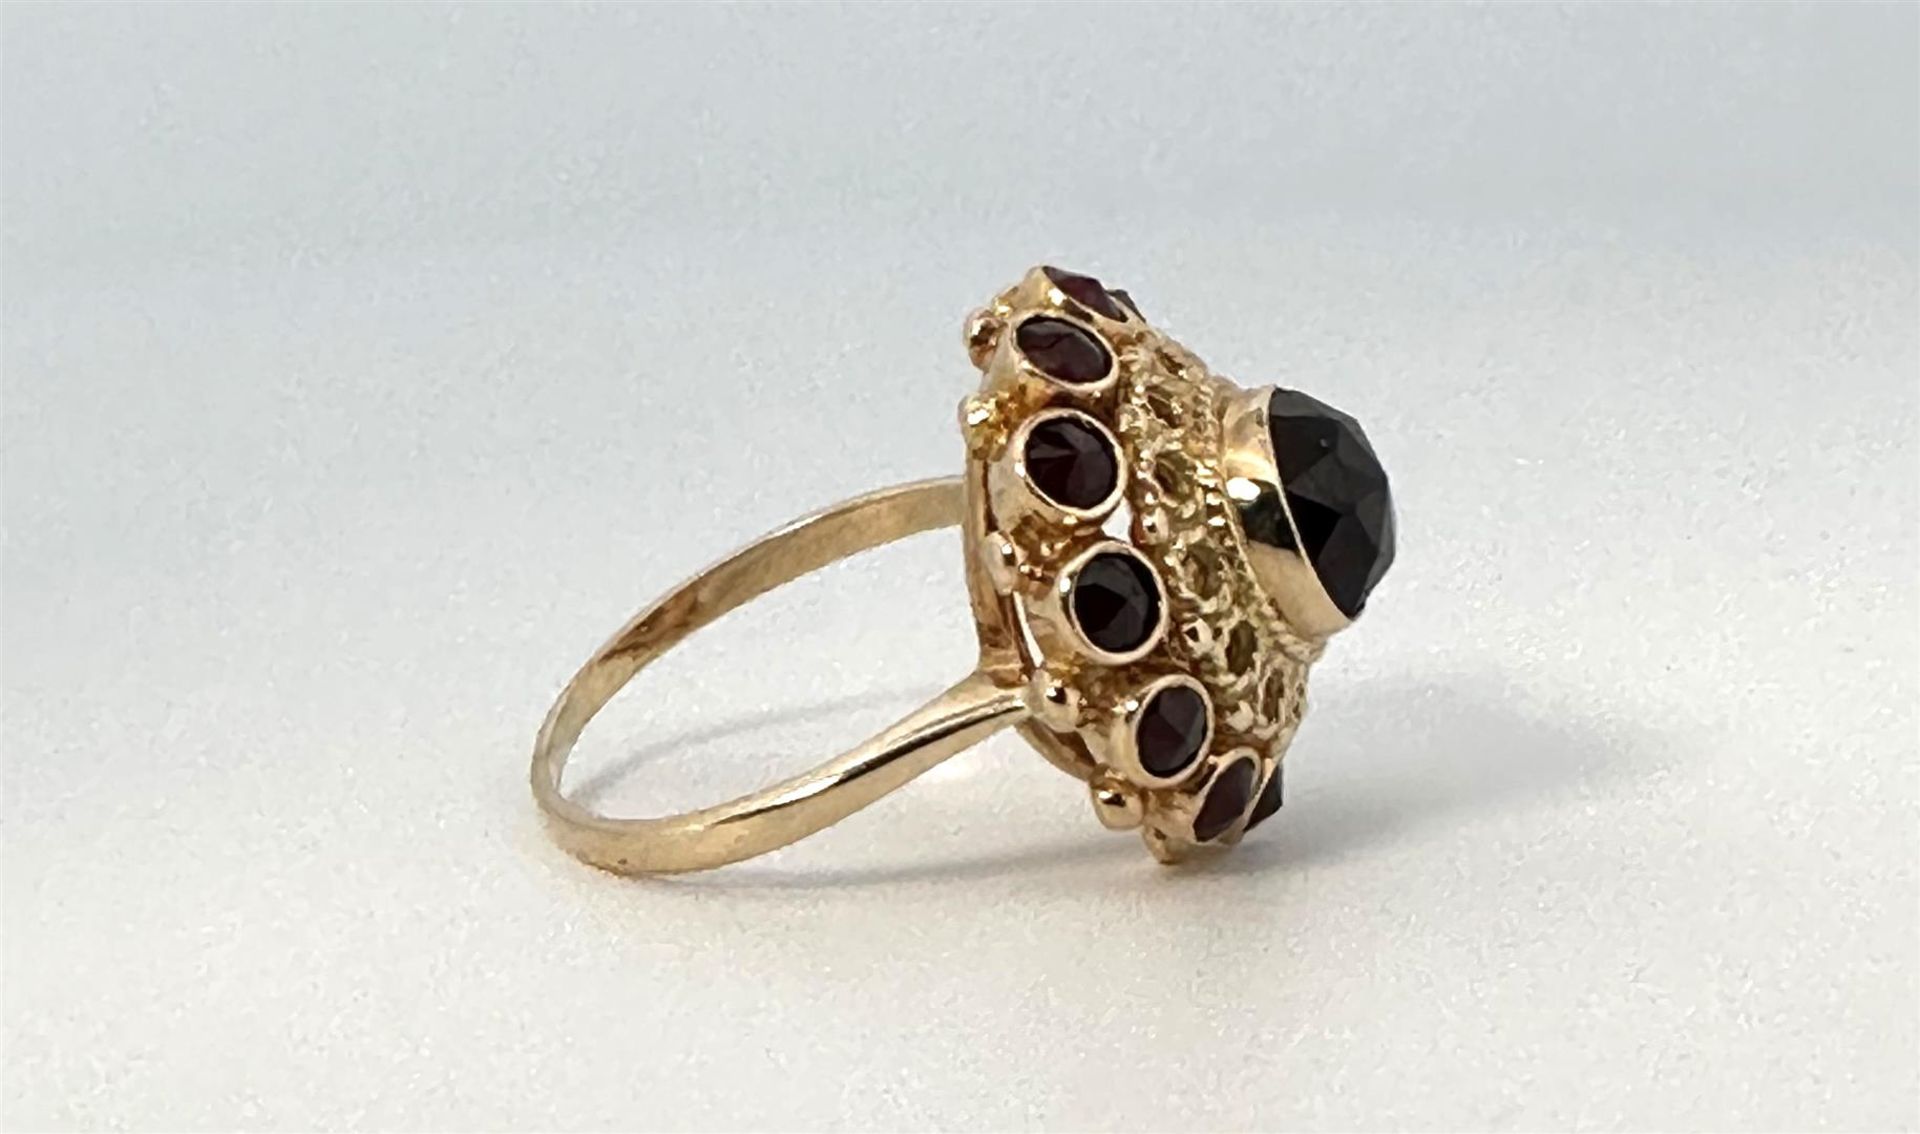 14kt yellow gold rosette ring set with garnet.
The ring is set with 1 central stone, rose cut of app - Bild 4 aus 4